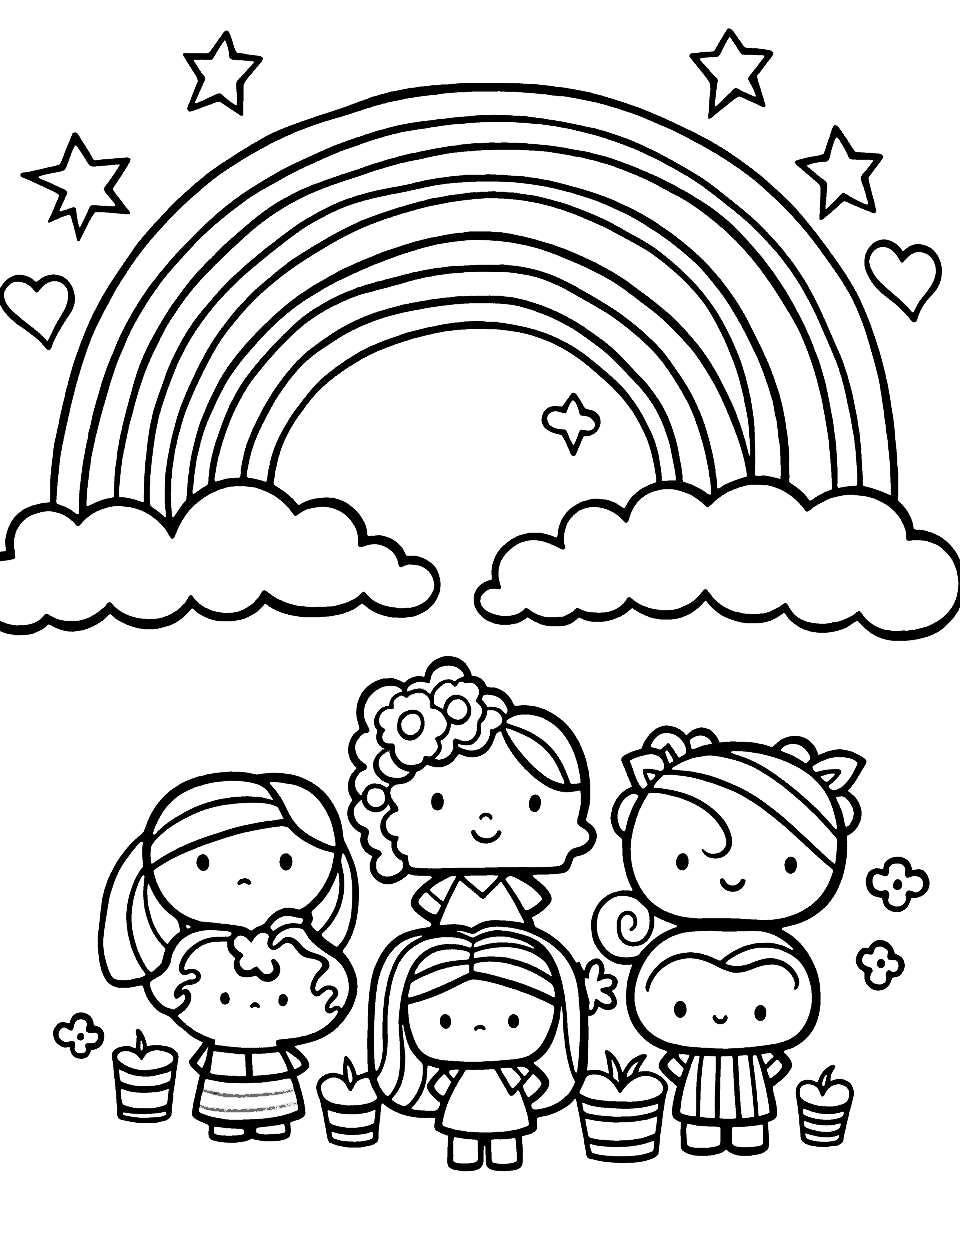 Rainbow coloring pages free printable sheets